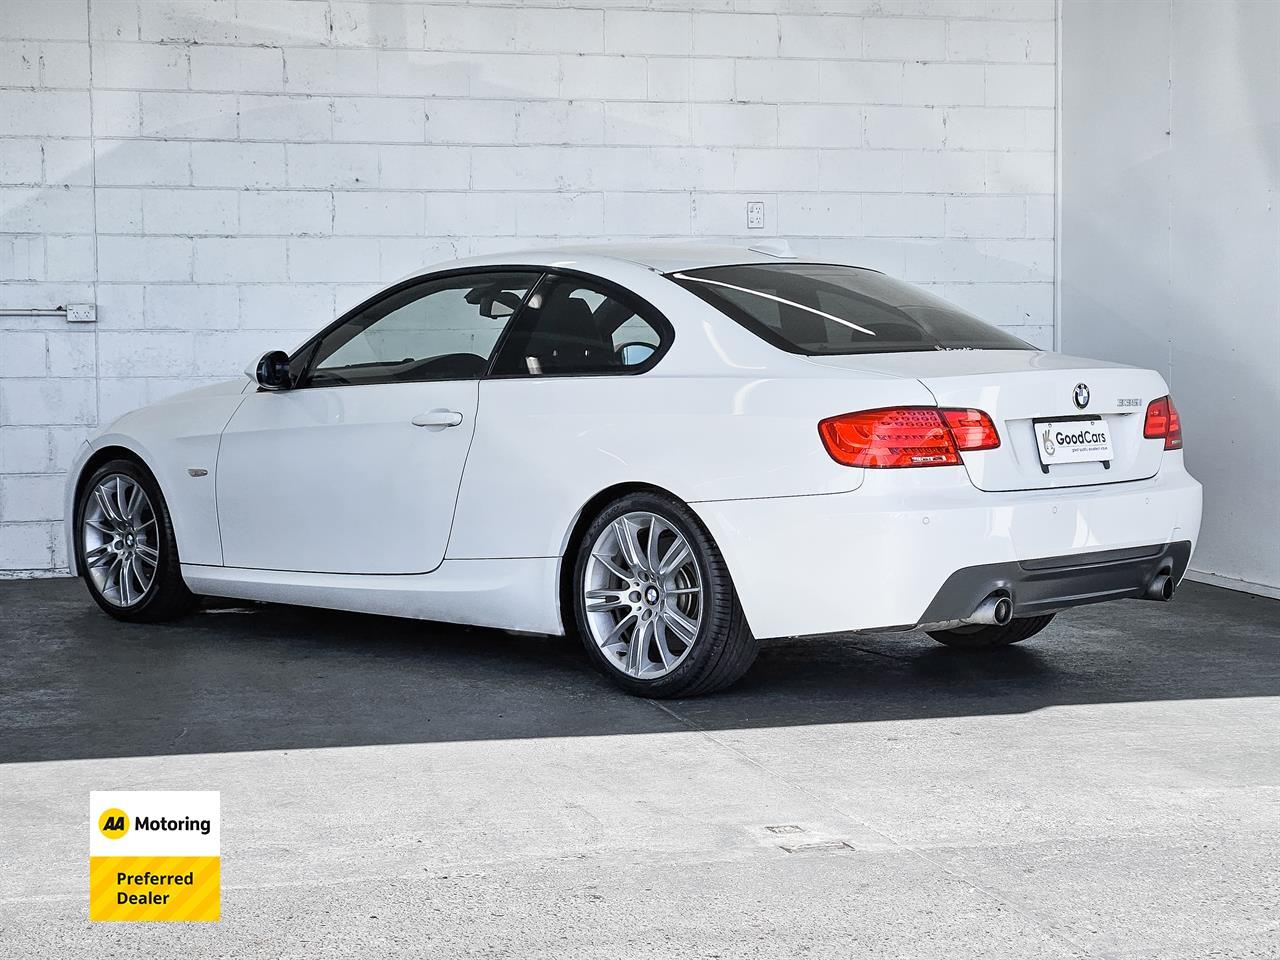 image-4, 2008 BMW 335i M Sport Coupe at Christchurch